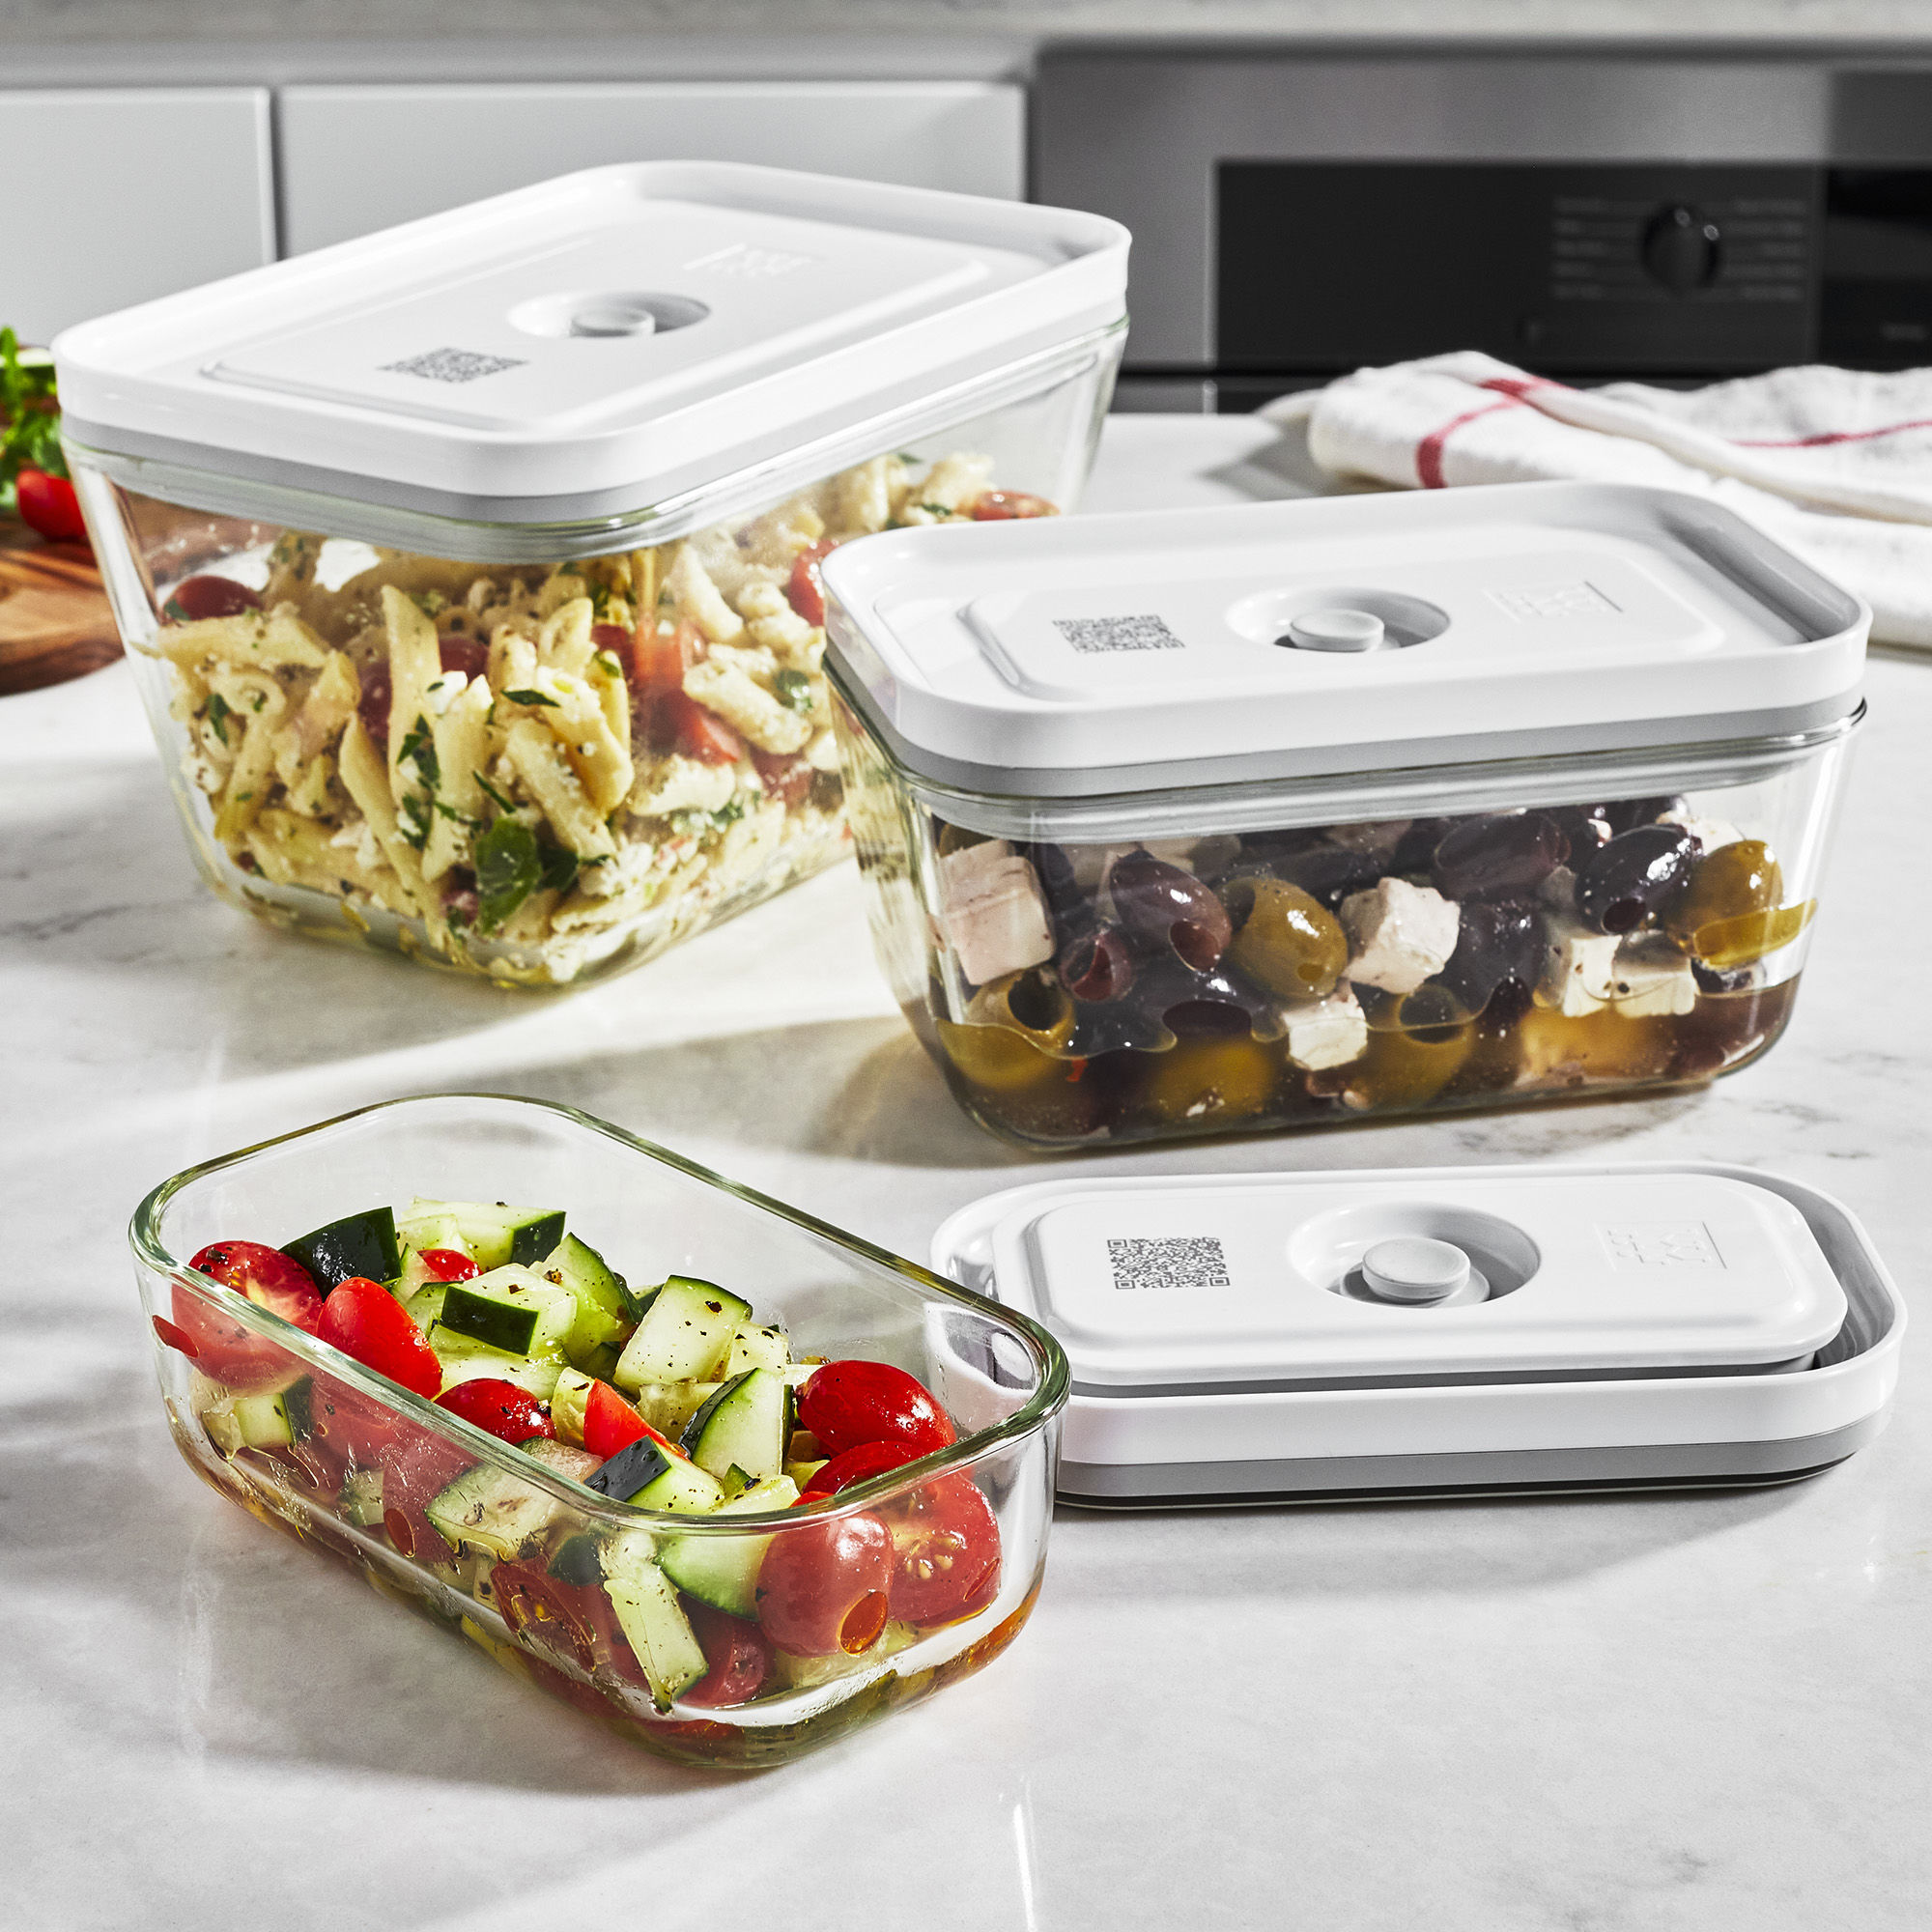 ZWILLING Small Fresh & Save Glass Vacuum Container + Reviews